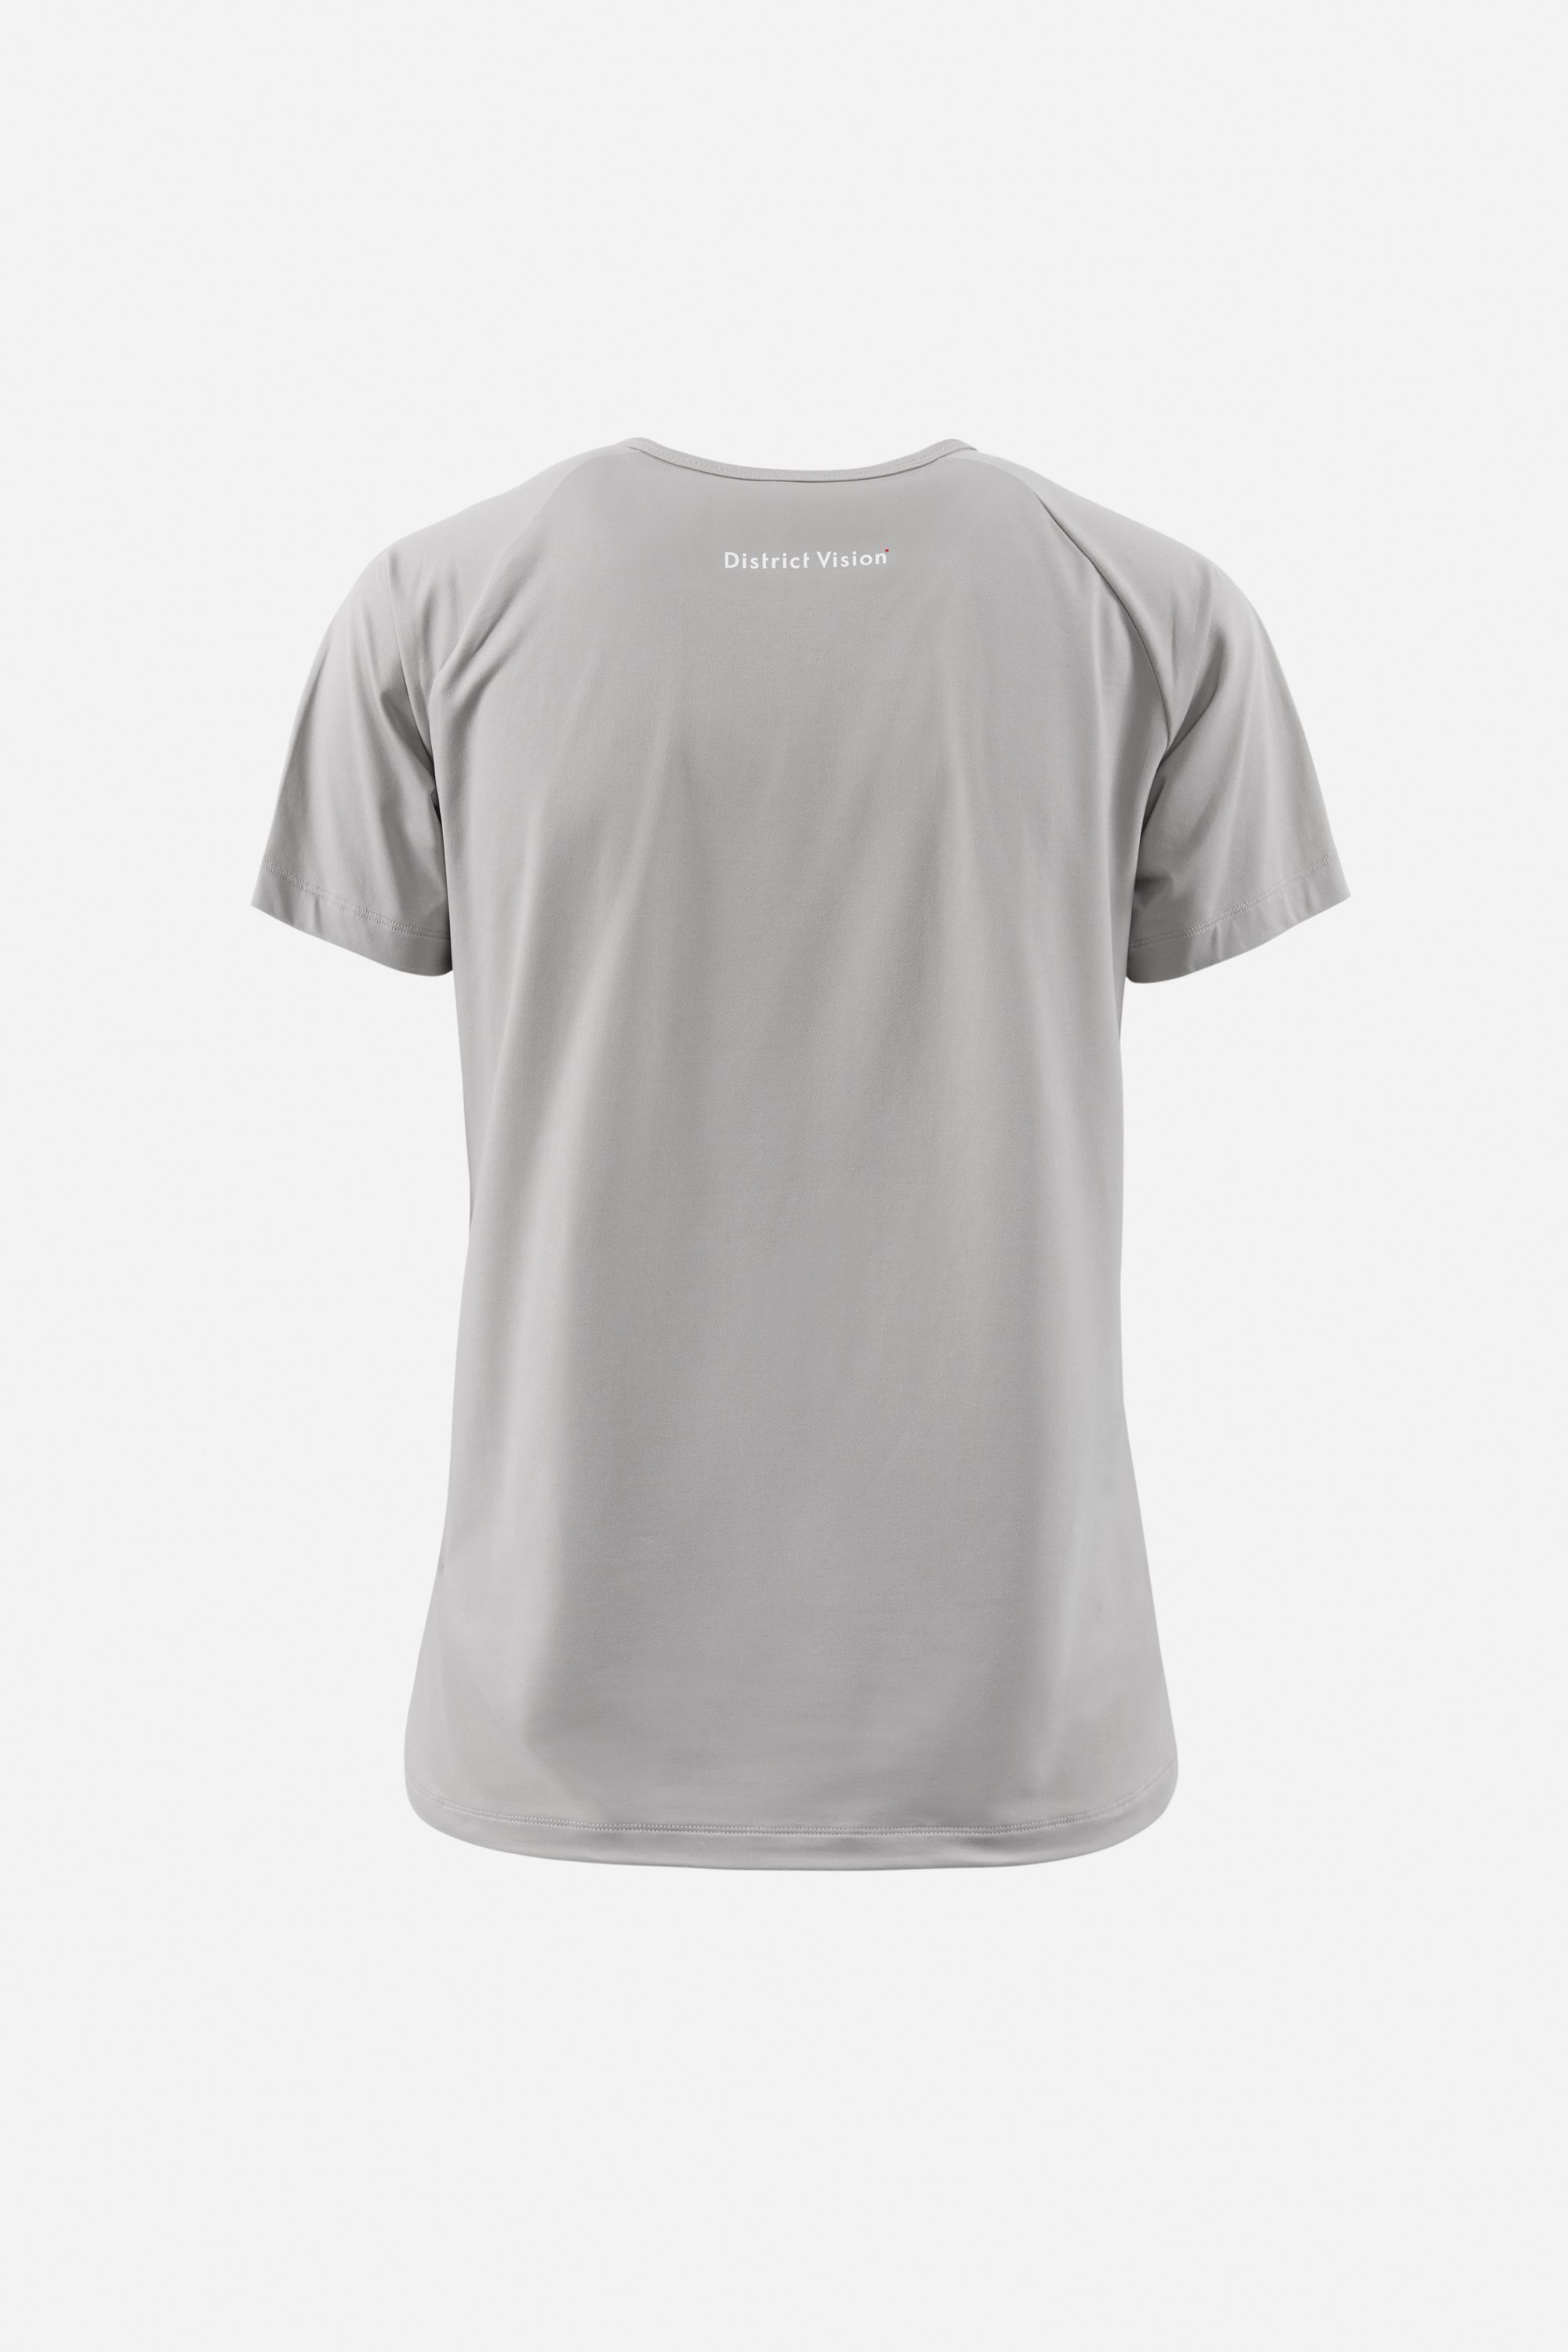 Short Sleeve Fitted Tee, Stone — District Vision